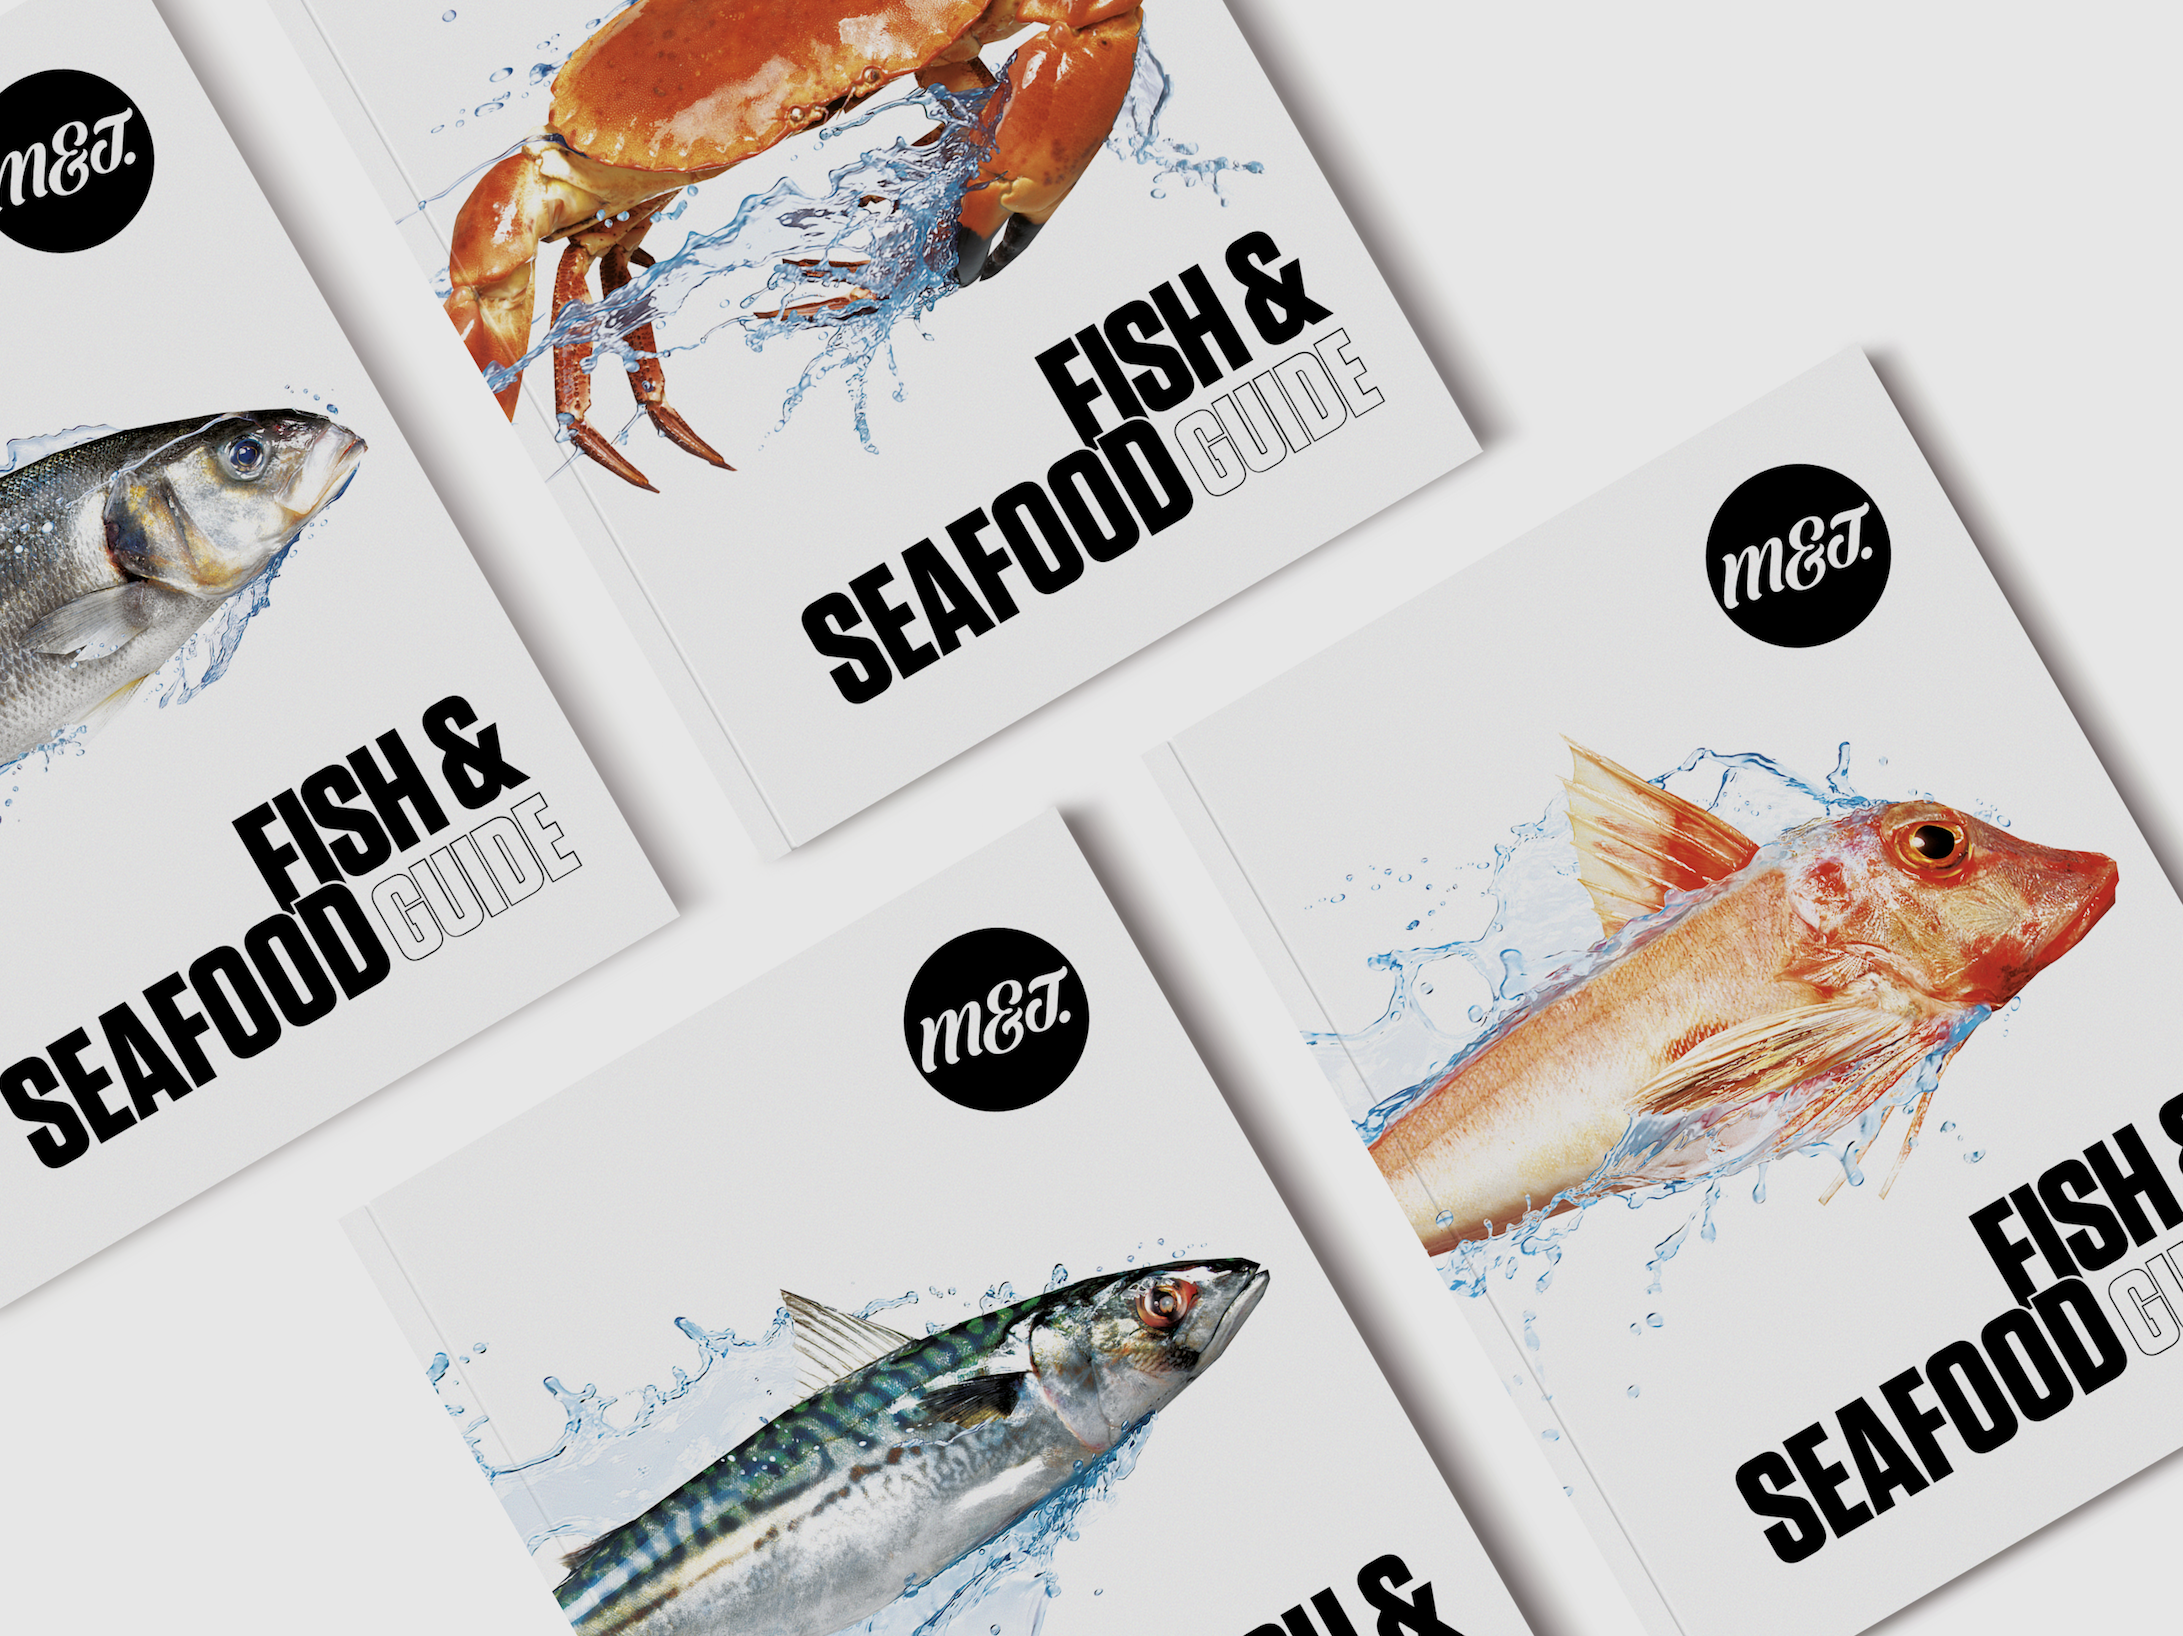 Fish & Seafood Guide